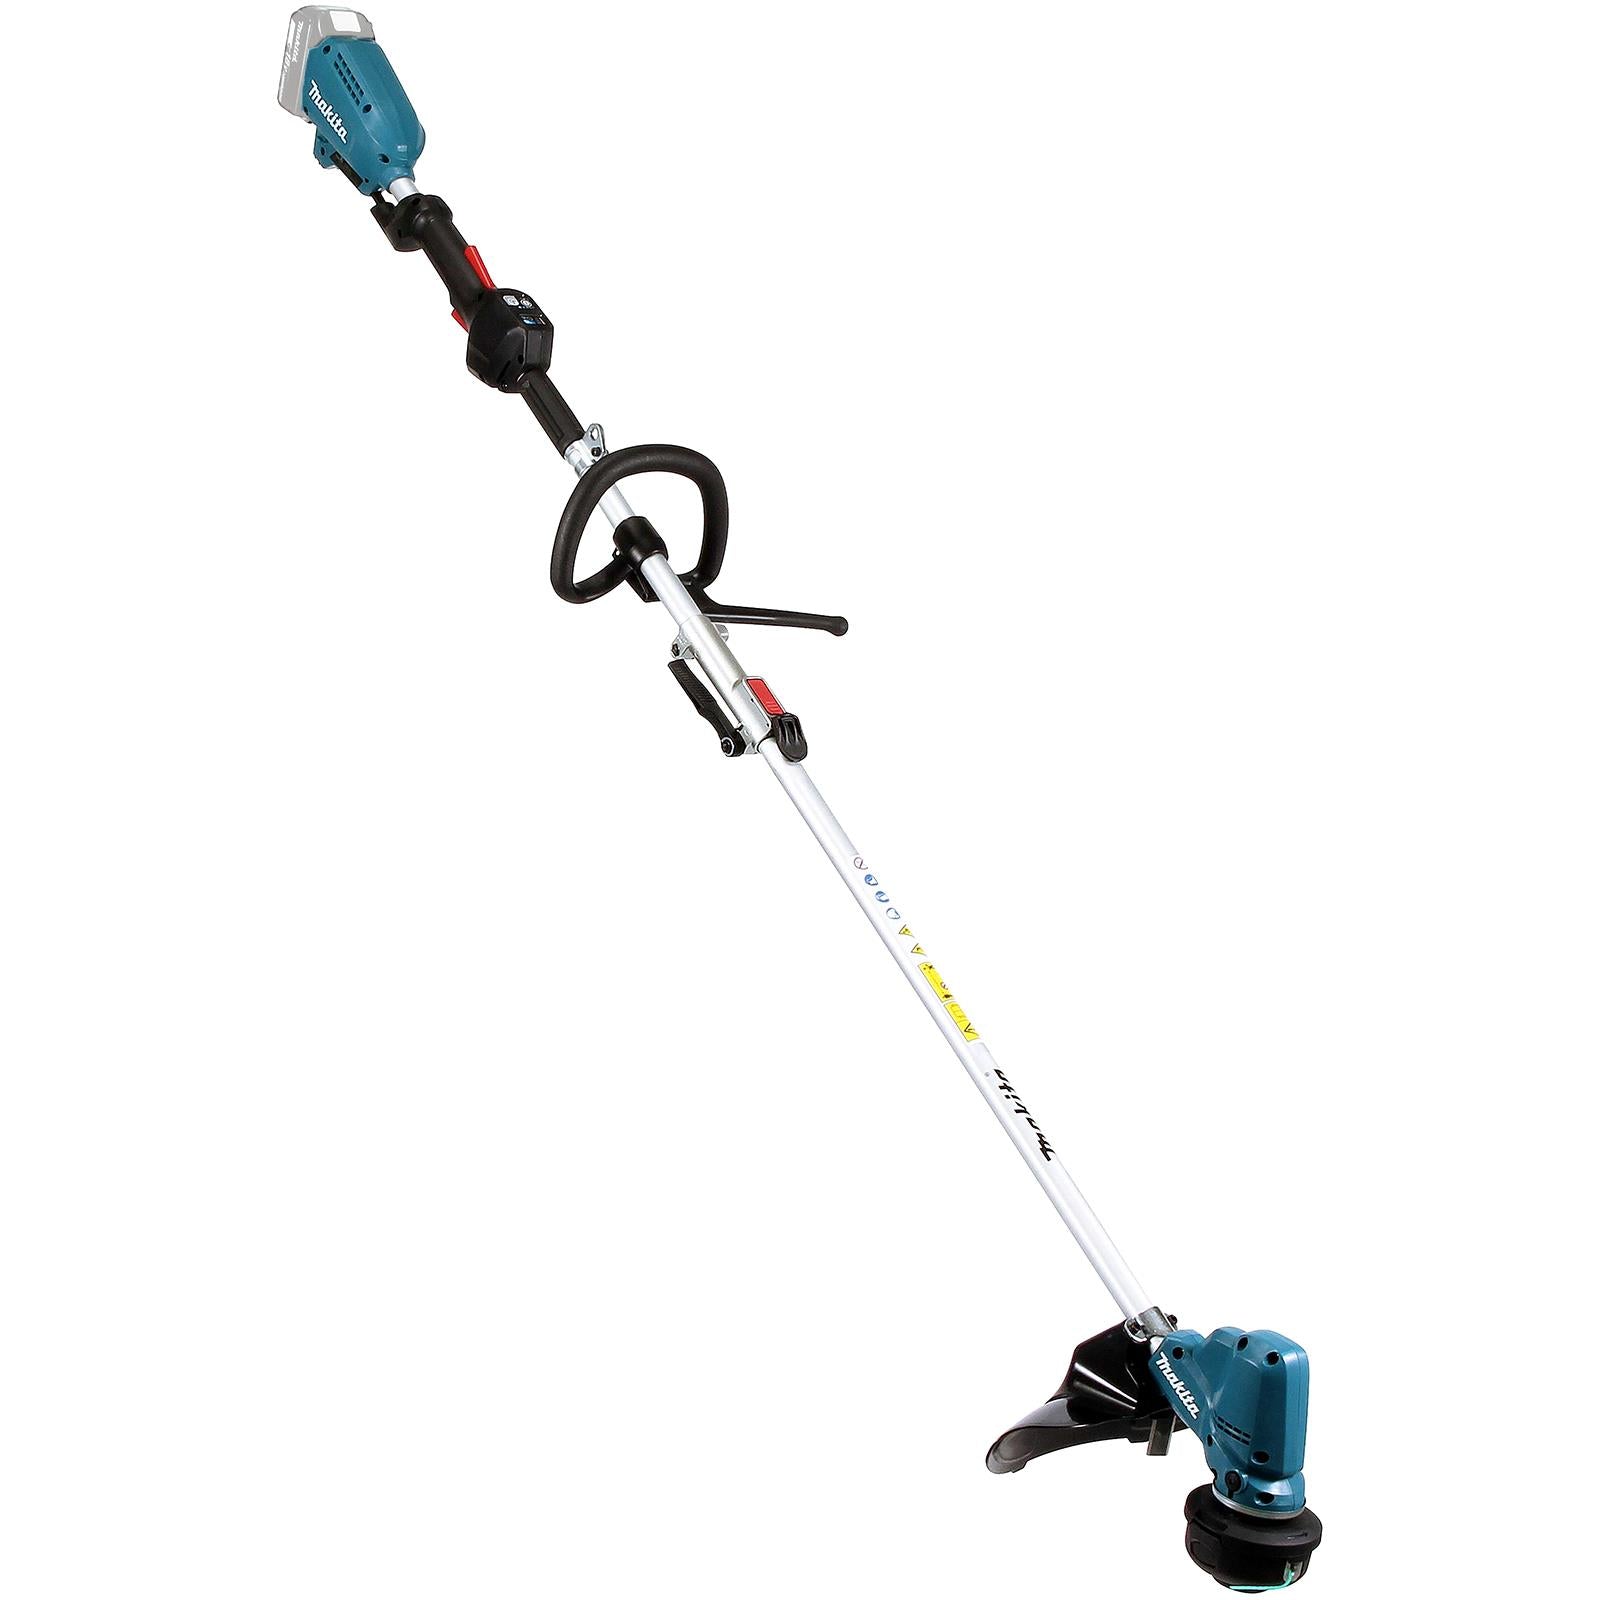 Makita Line Trimmer Strimmer 18V LXT Brushless Cordless Garden Lawn Strimming Bare Unit Body Only DUR191LZX3